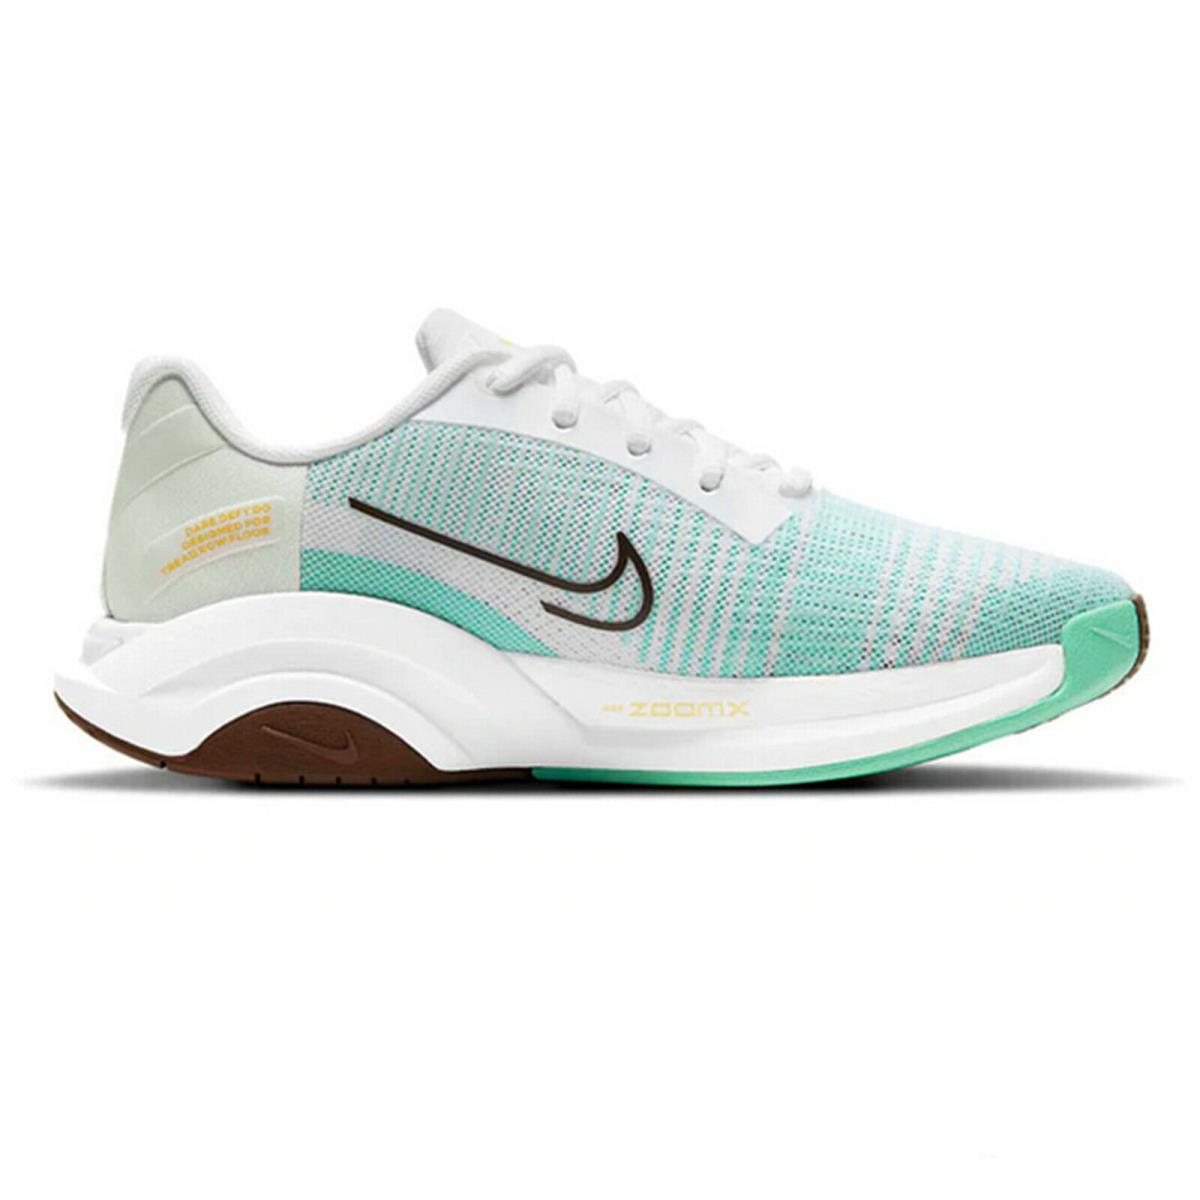 Nike shoes ZOOMX SUPERREP - WHITE/BRONZE ECLIPSE 4